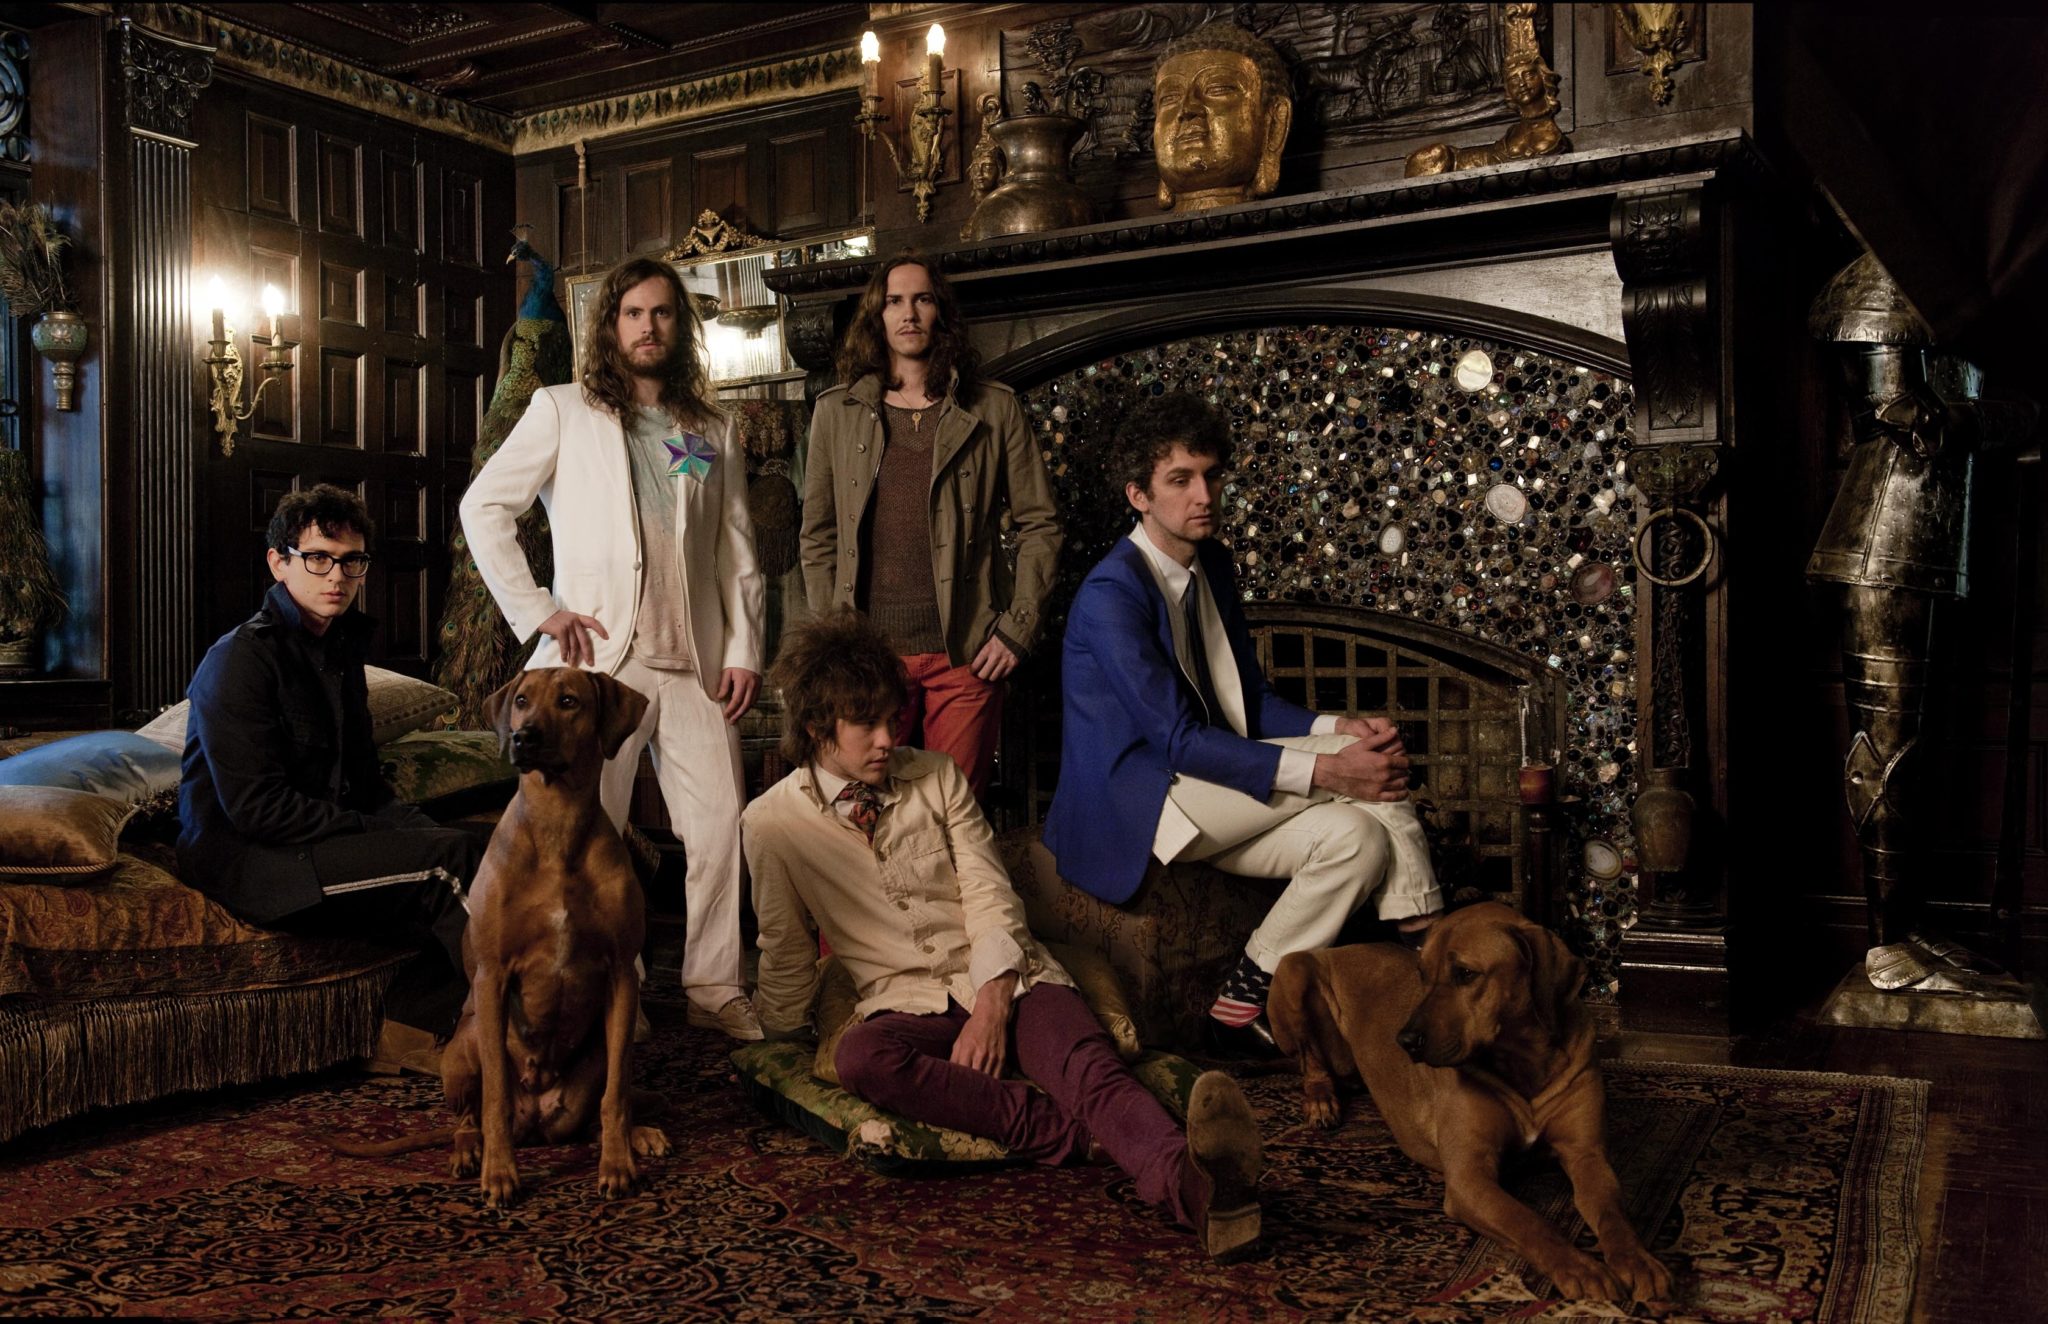 MGMT – MGMT